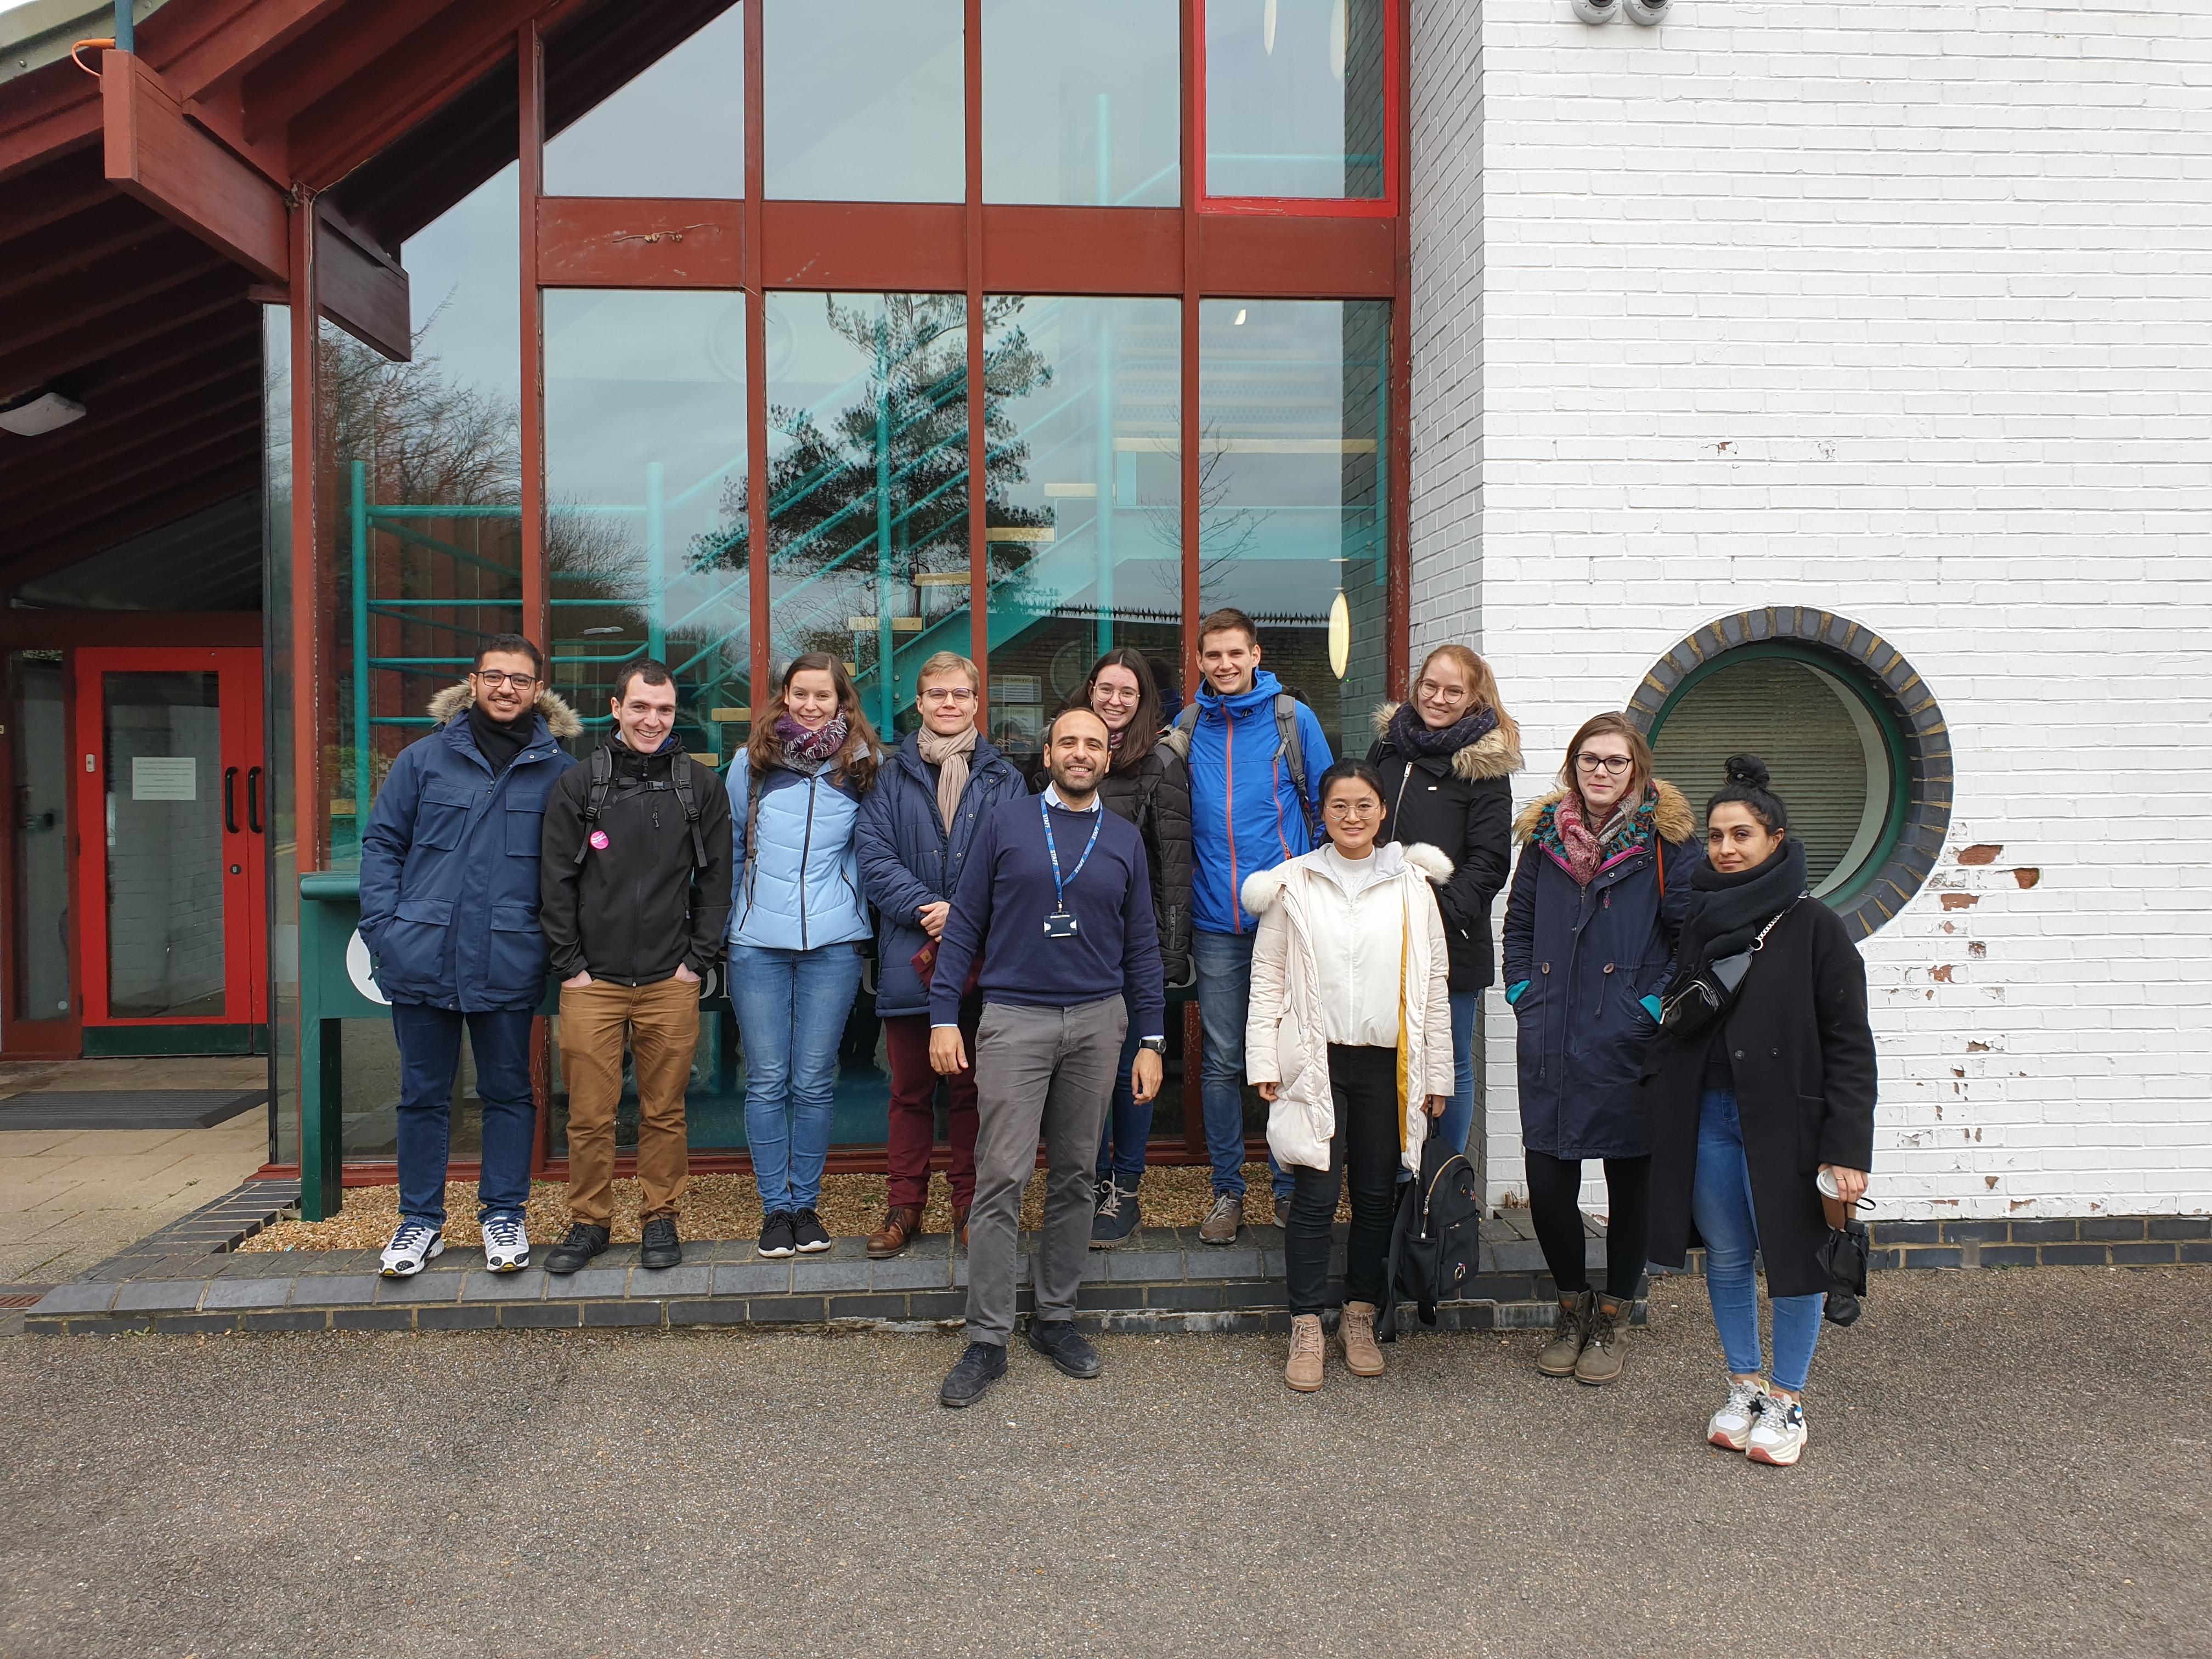 Students from Aachen, Germany visited the Schofield Centrifuge Centre